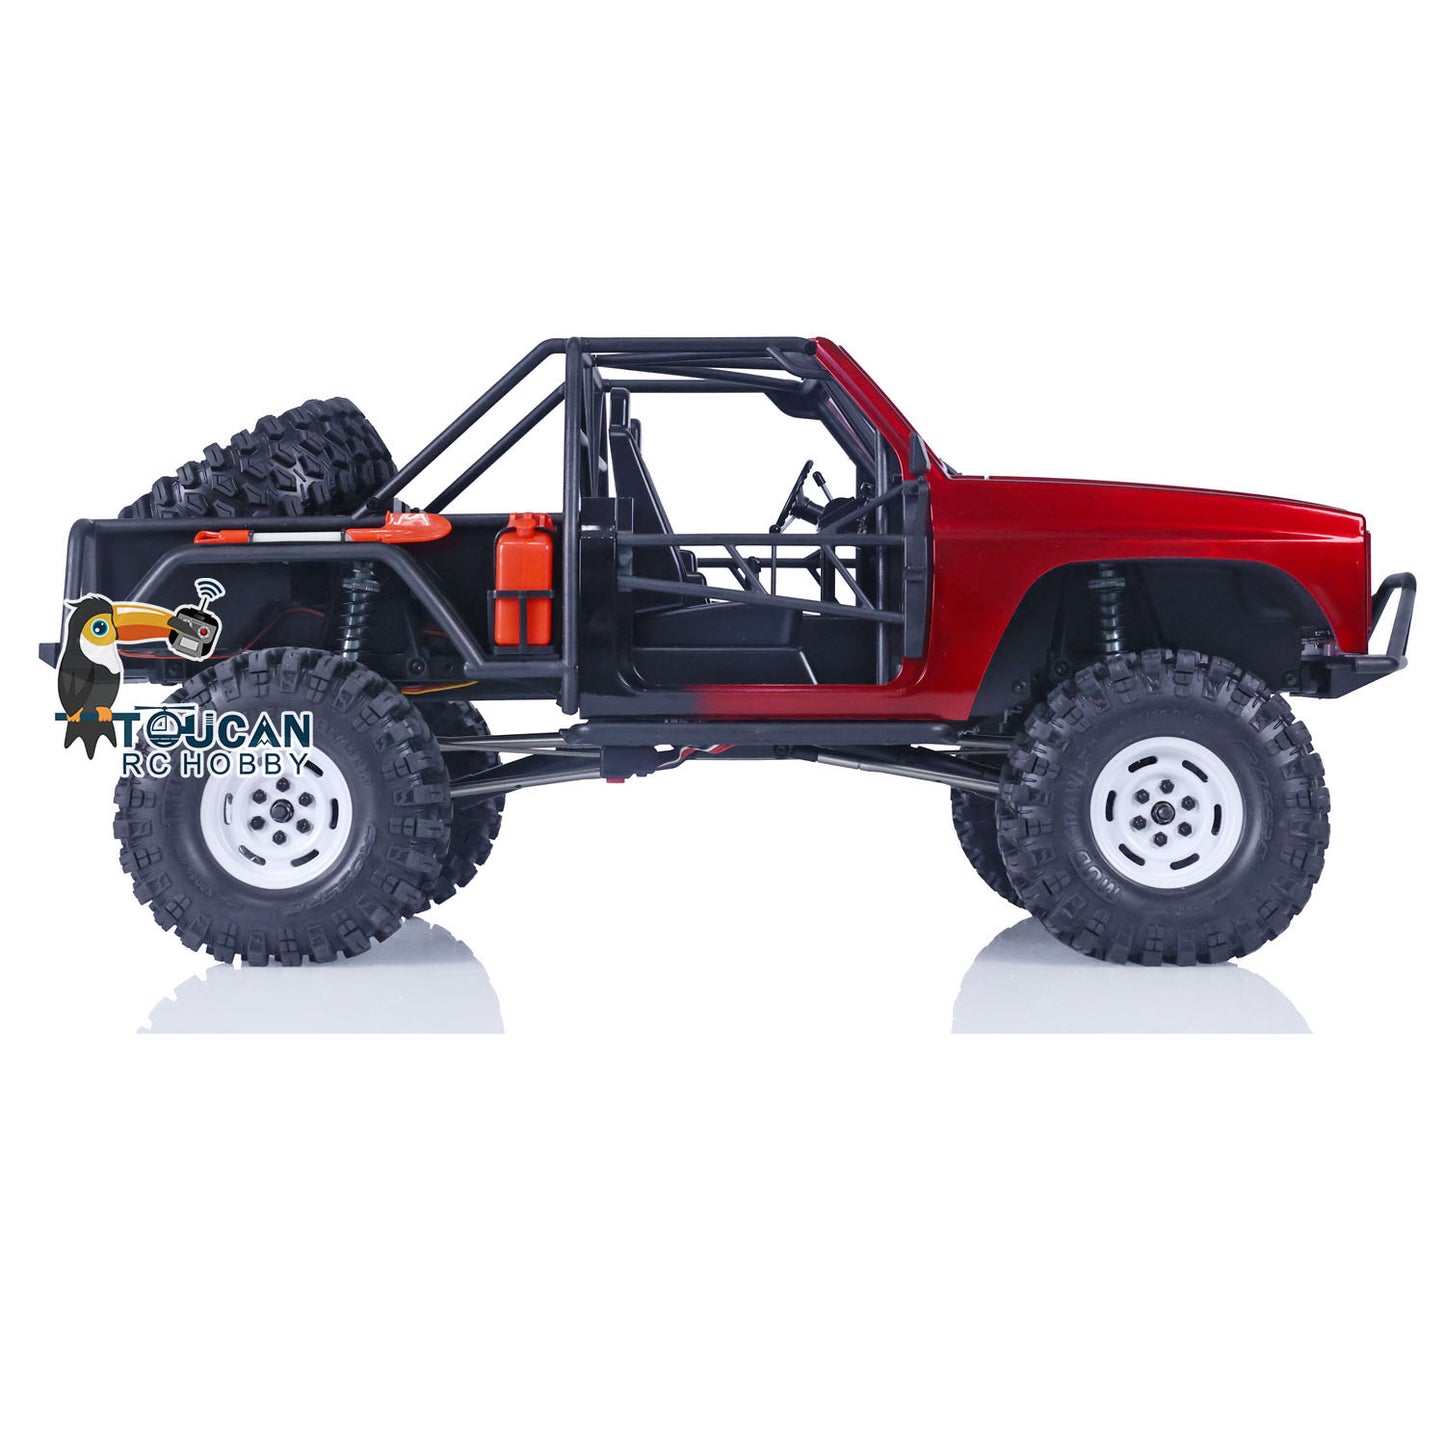 IN STOCK CROSSRC 1/10 XT4 4WD RC Off-road Vehicle 4X4 Painted Assembled Radio Controlled Crawler Car Hobby Model ESC Servo Motor